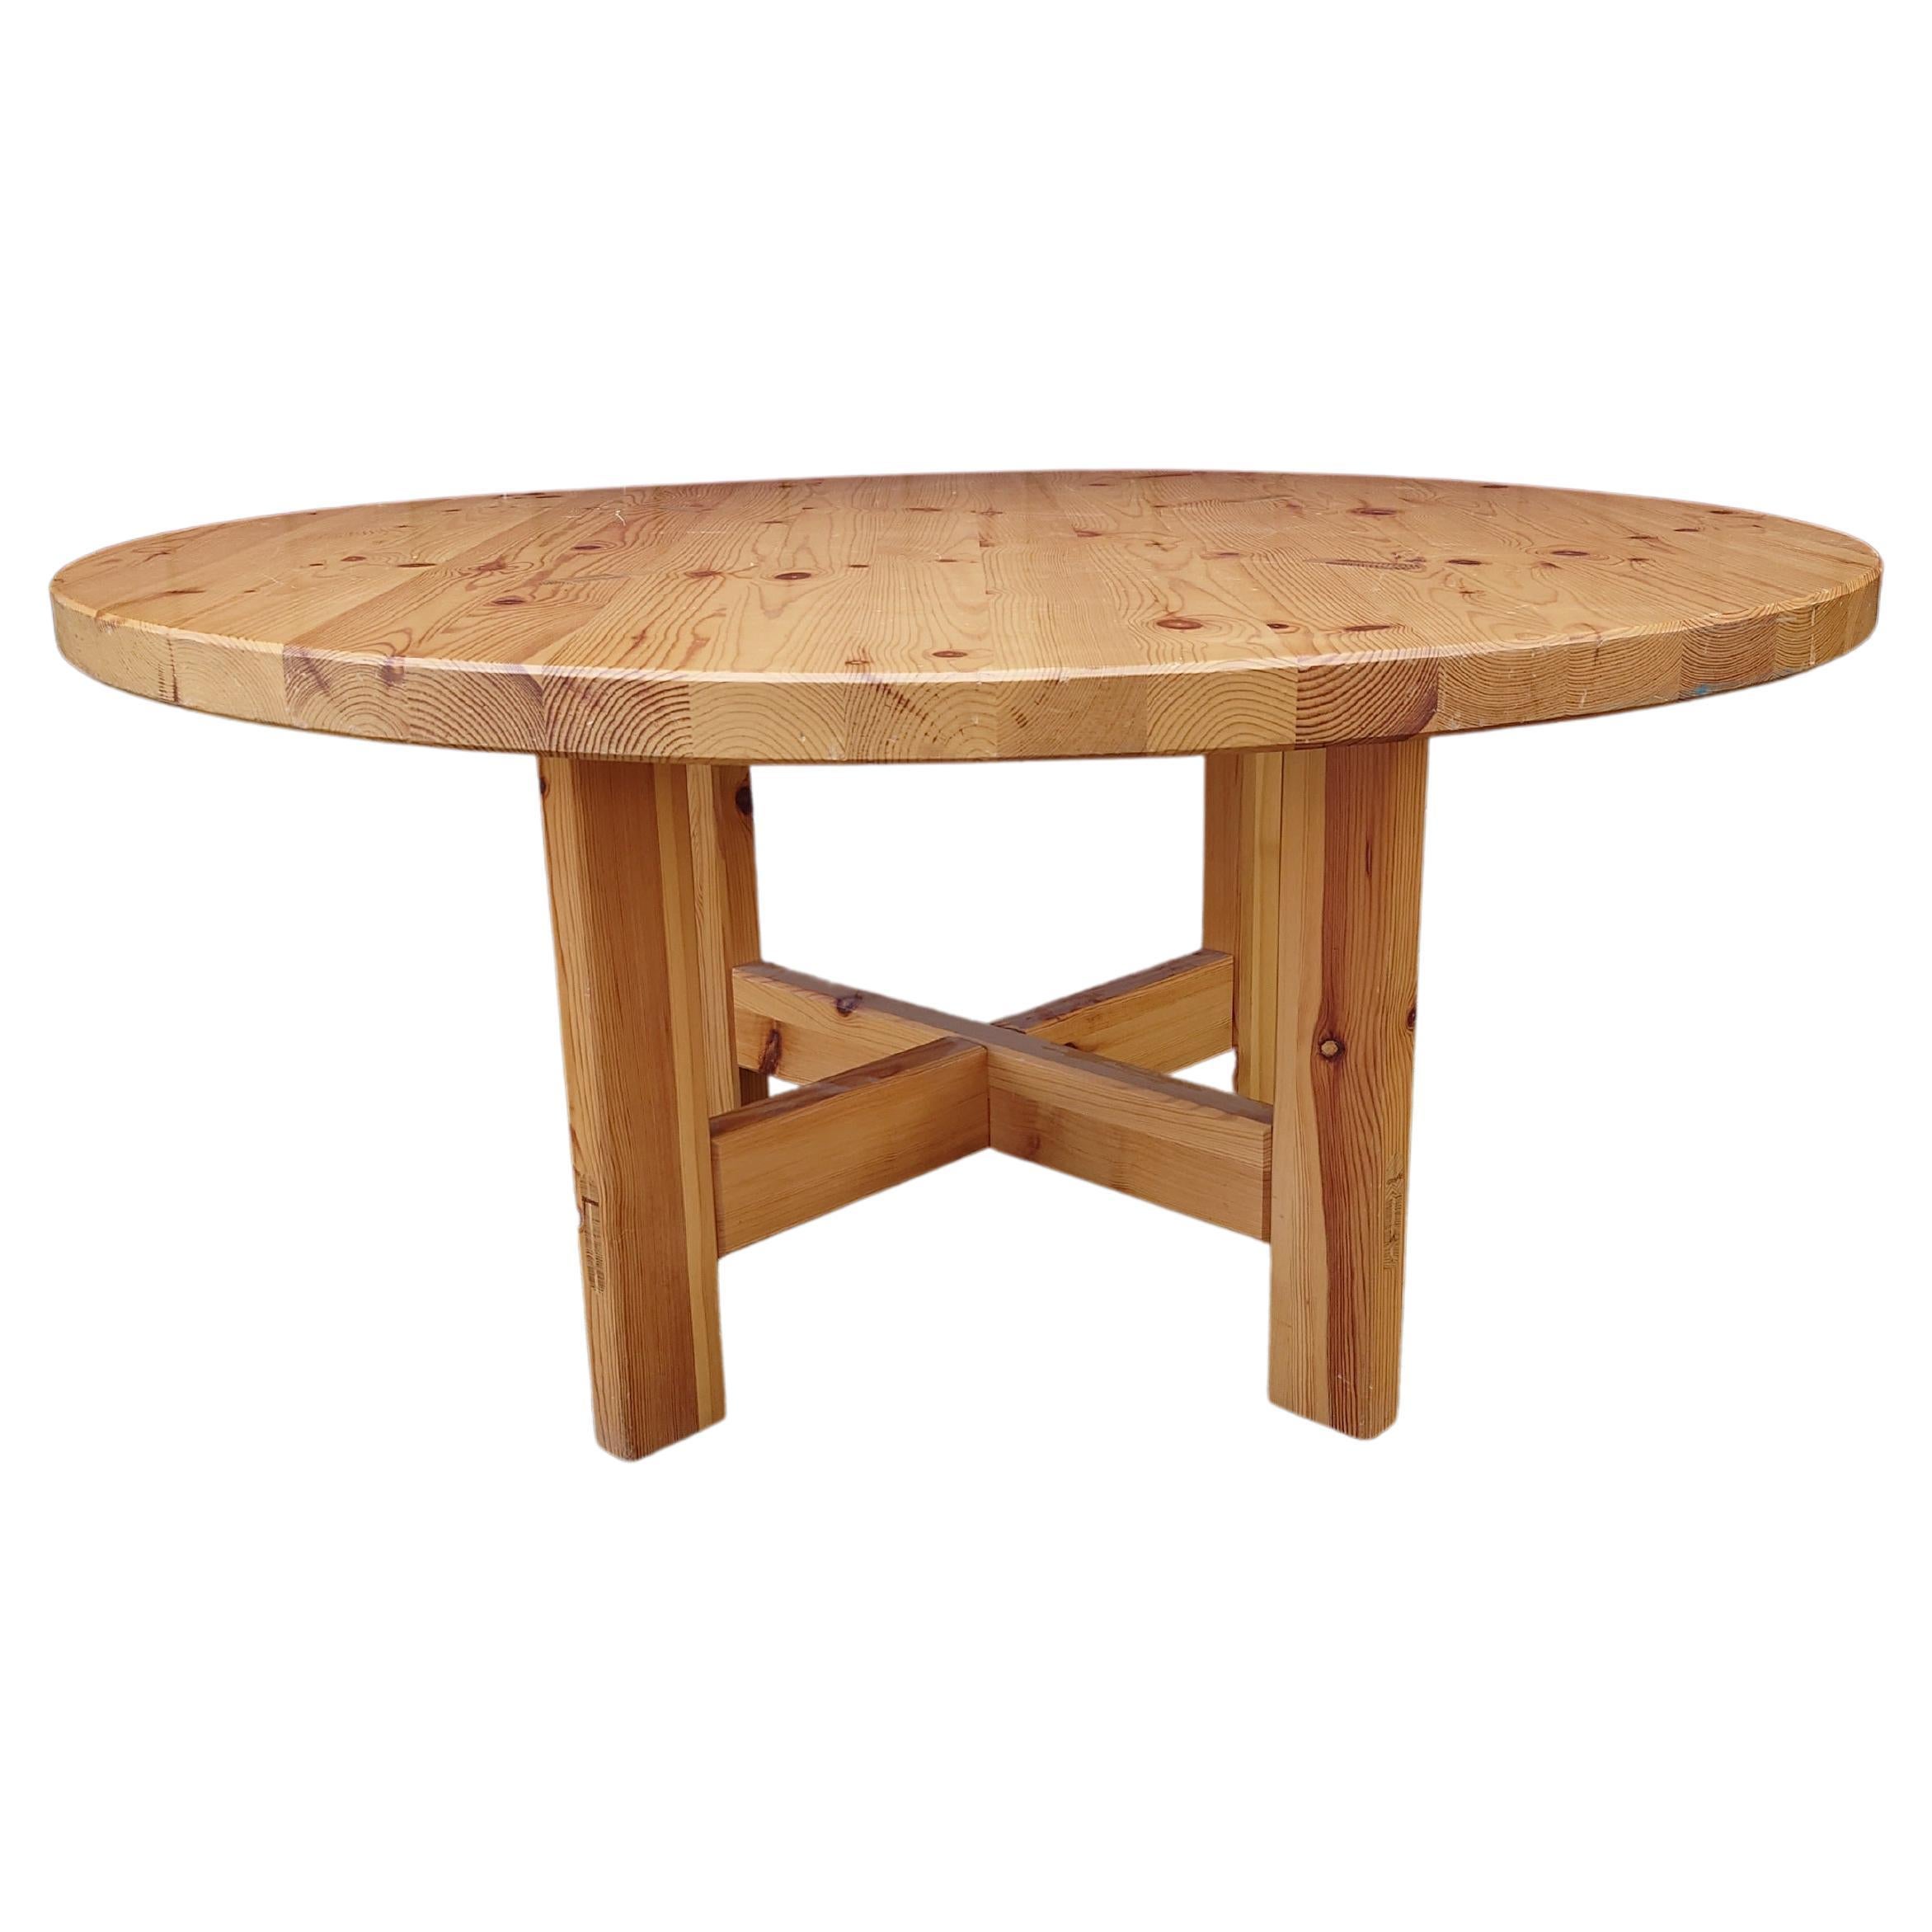 Dining Table "Rw152" by Roland Wilhelmsson for Karl Andersson & Söner 1970s Pine